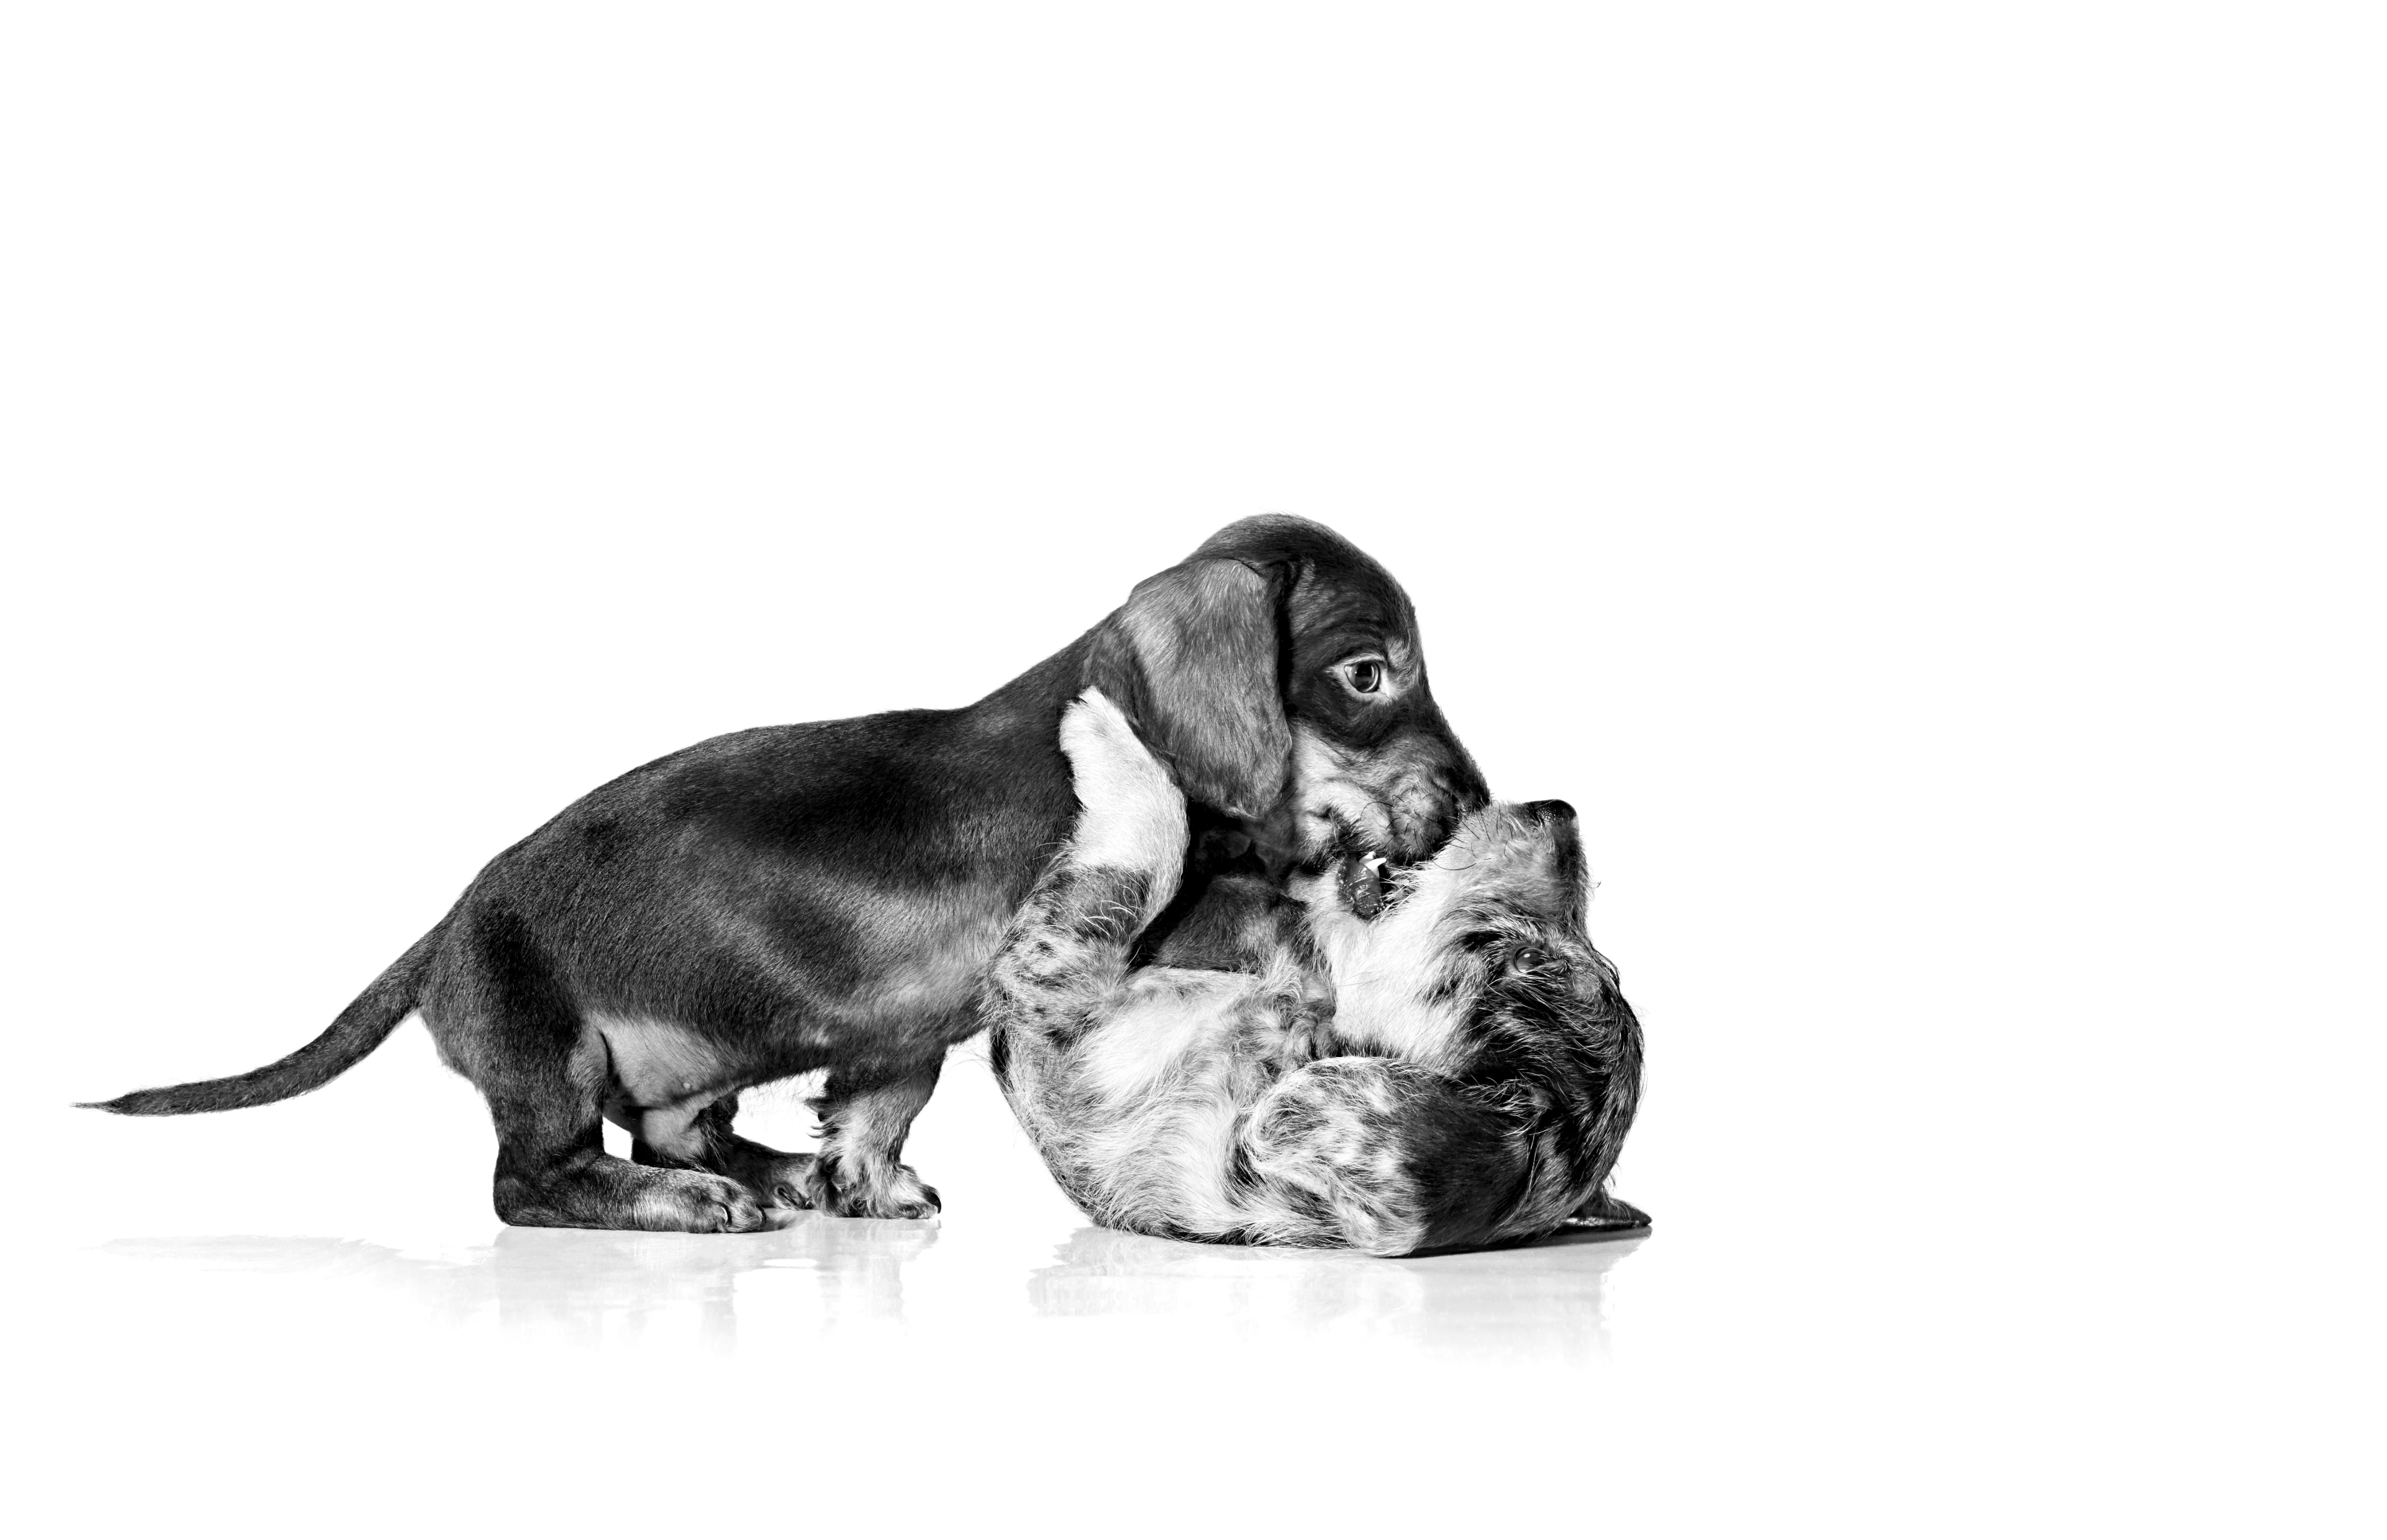 Dachshund puppies playing in black and white